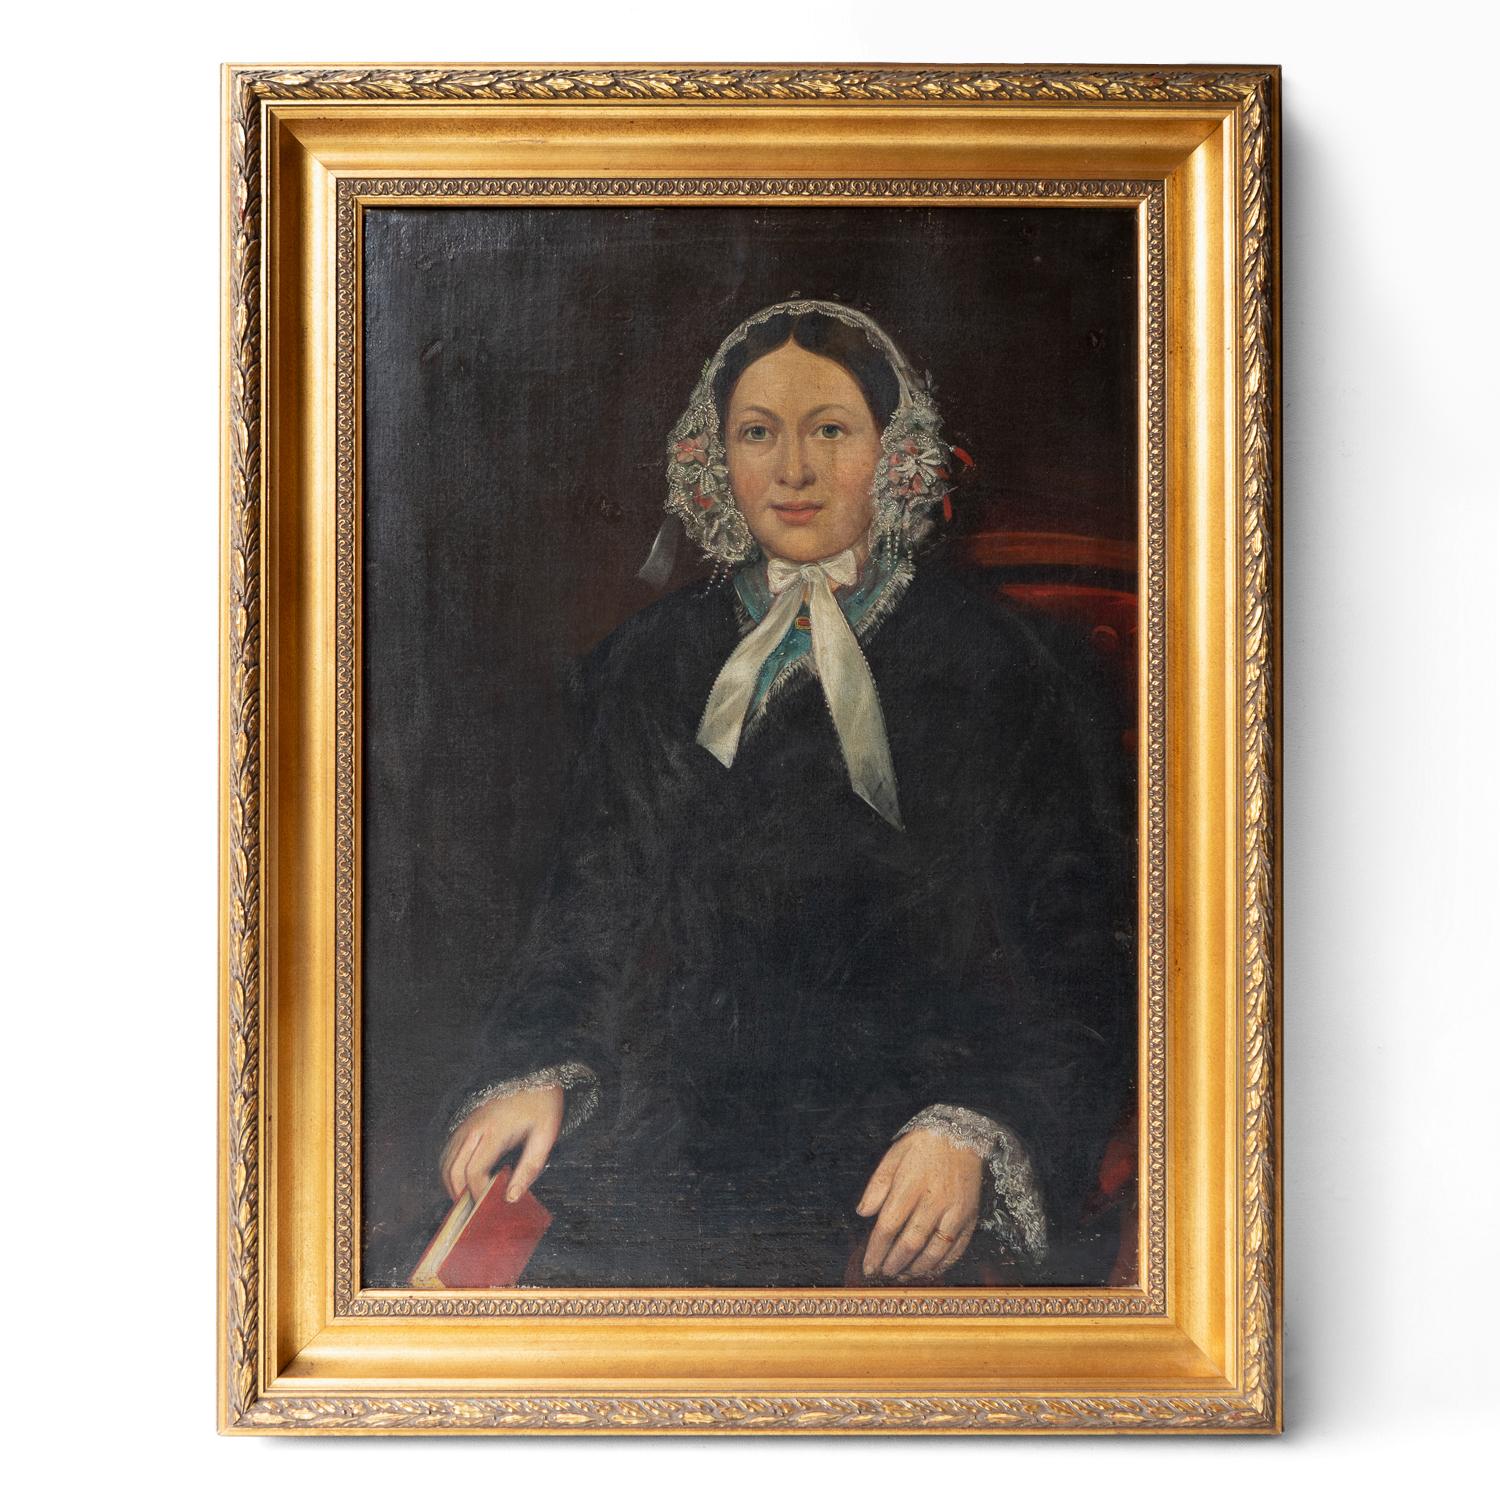 ANTIQUE ORIGINAL OIL ON CANVAS PAINTING DEPICTING A FEMALE SITTER
Depicting a woman with a warm face and friendly pale blue eyes. She is sitting on a red button-backed chair wrapped in a black velvet cloak with a lace cap on her head with flowers.